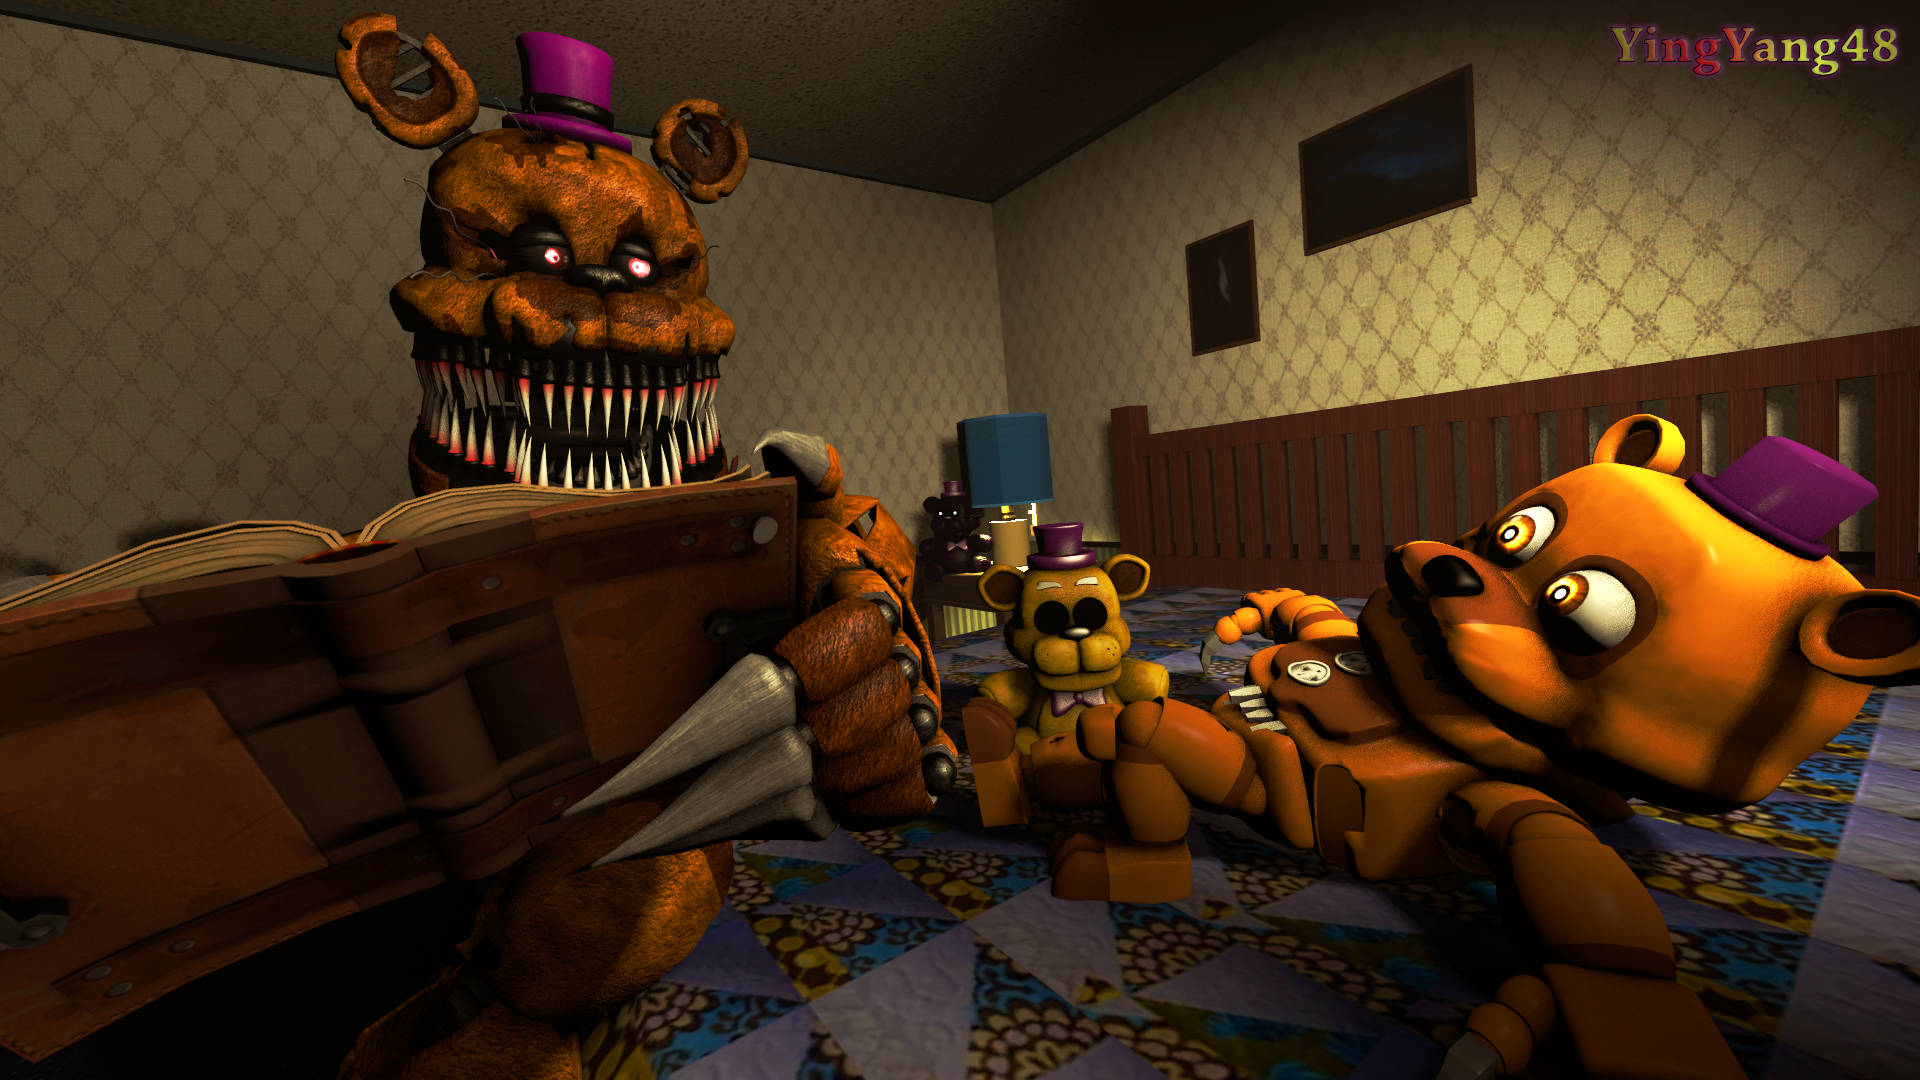 Nightmare Freddy Bed Time Story Wallpaper